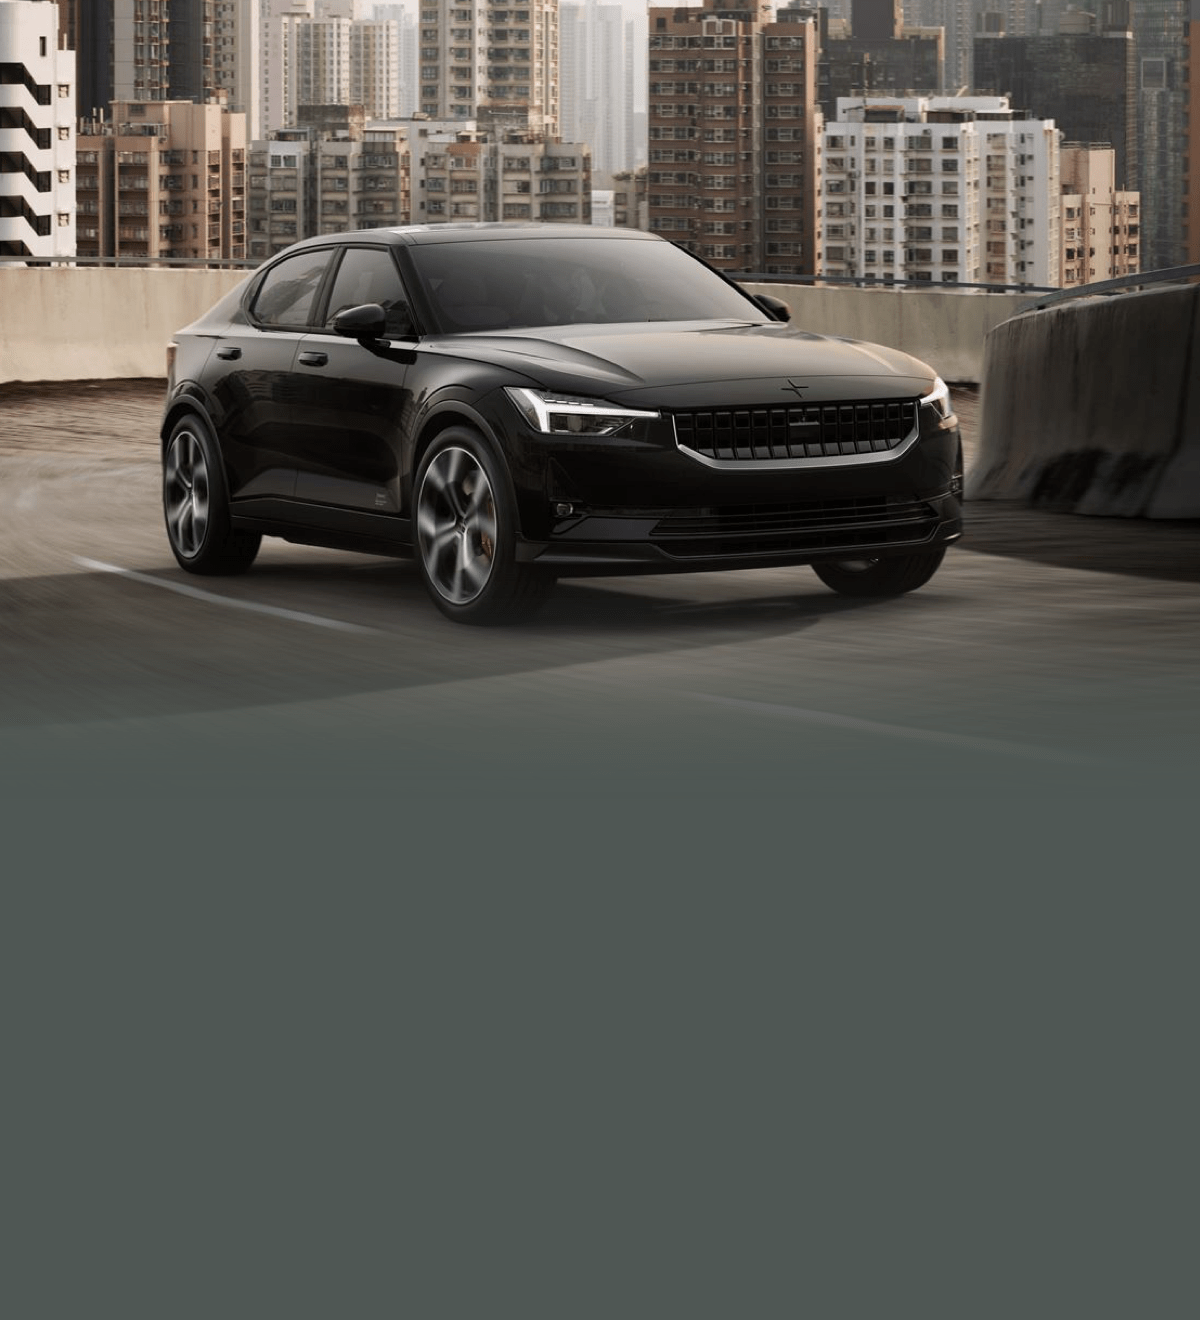 Polestar 2 - Leasing prices and specifications